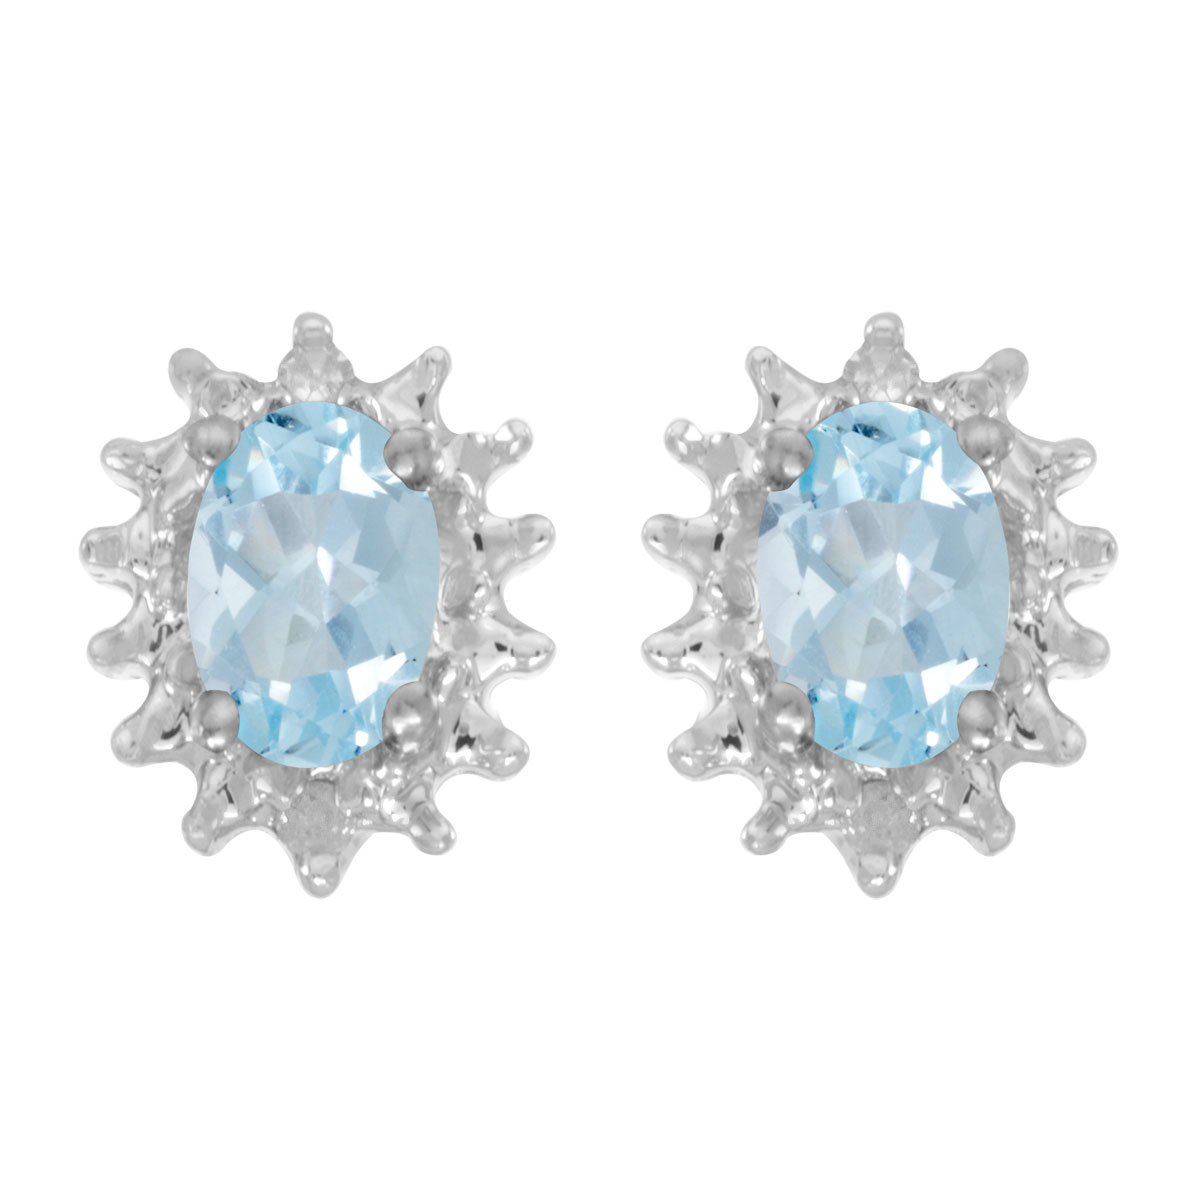 JCX2004: These 14k white gold oval aquamarine and diamond earrings feature 6x4 mm genuine natural aquamarines with a 0.58 ct total weight and .04 ct diamonds.